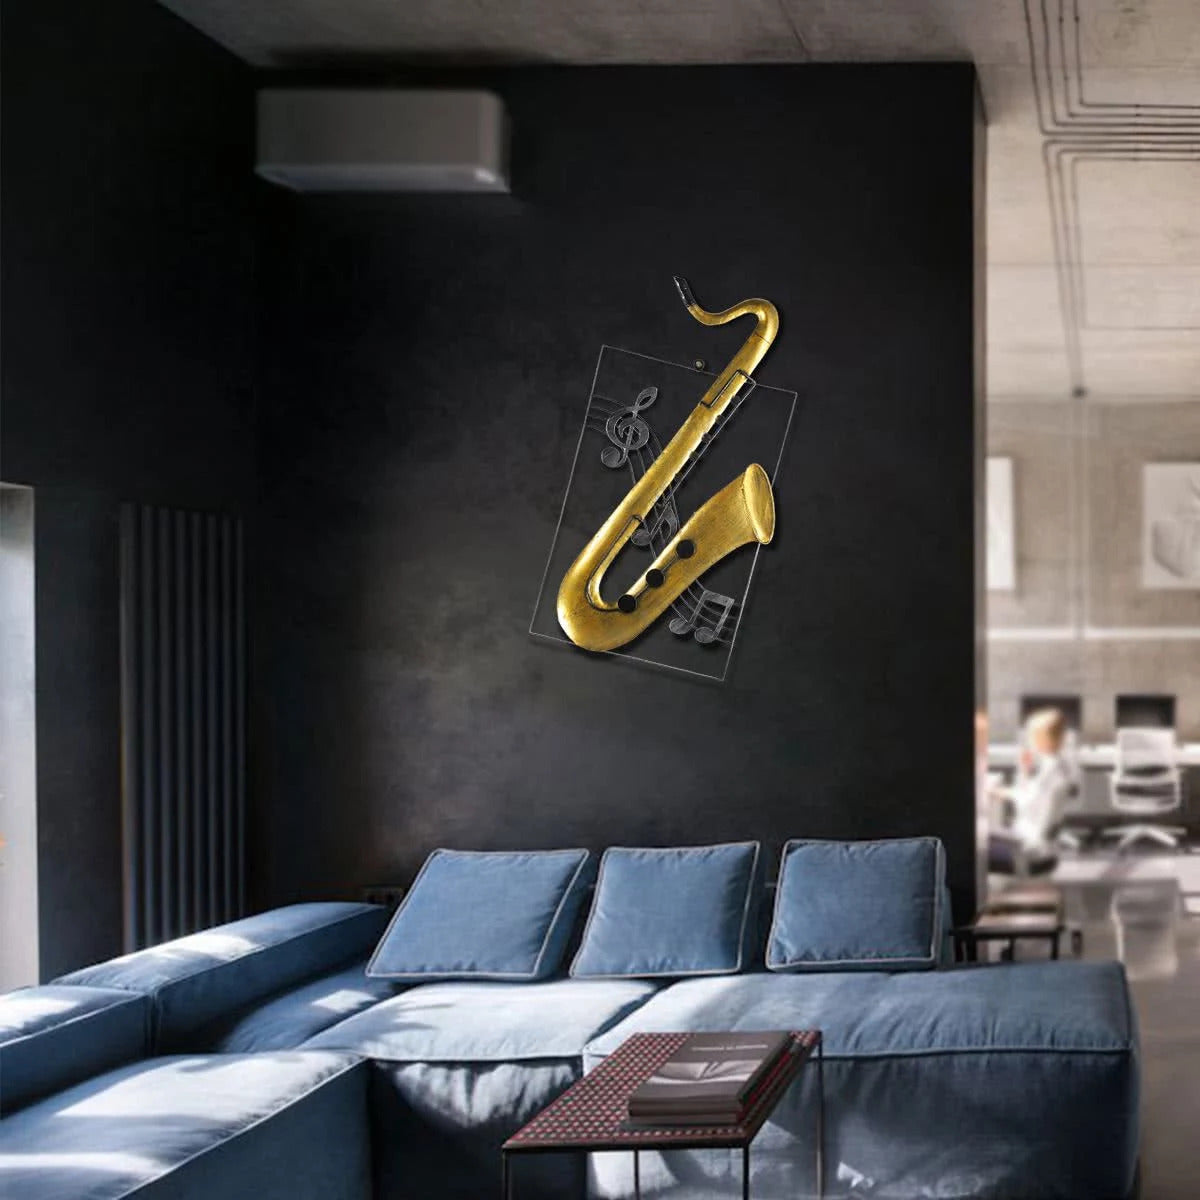 Musical Instrument Wall Art with Saxophone